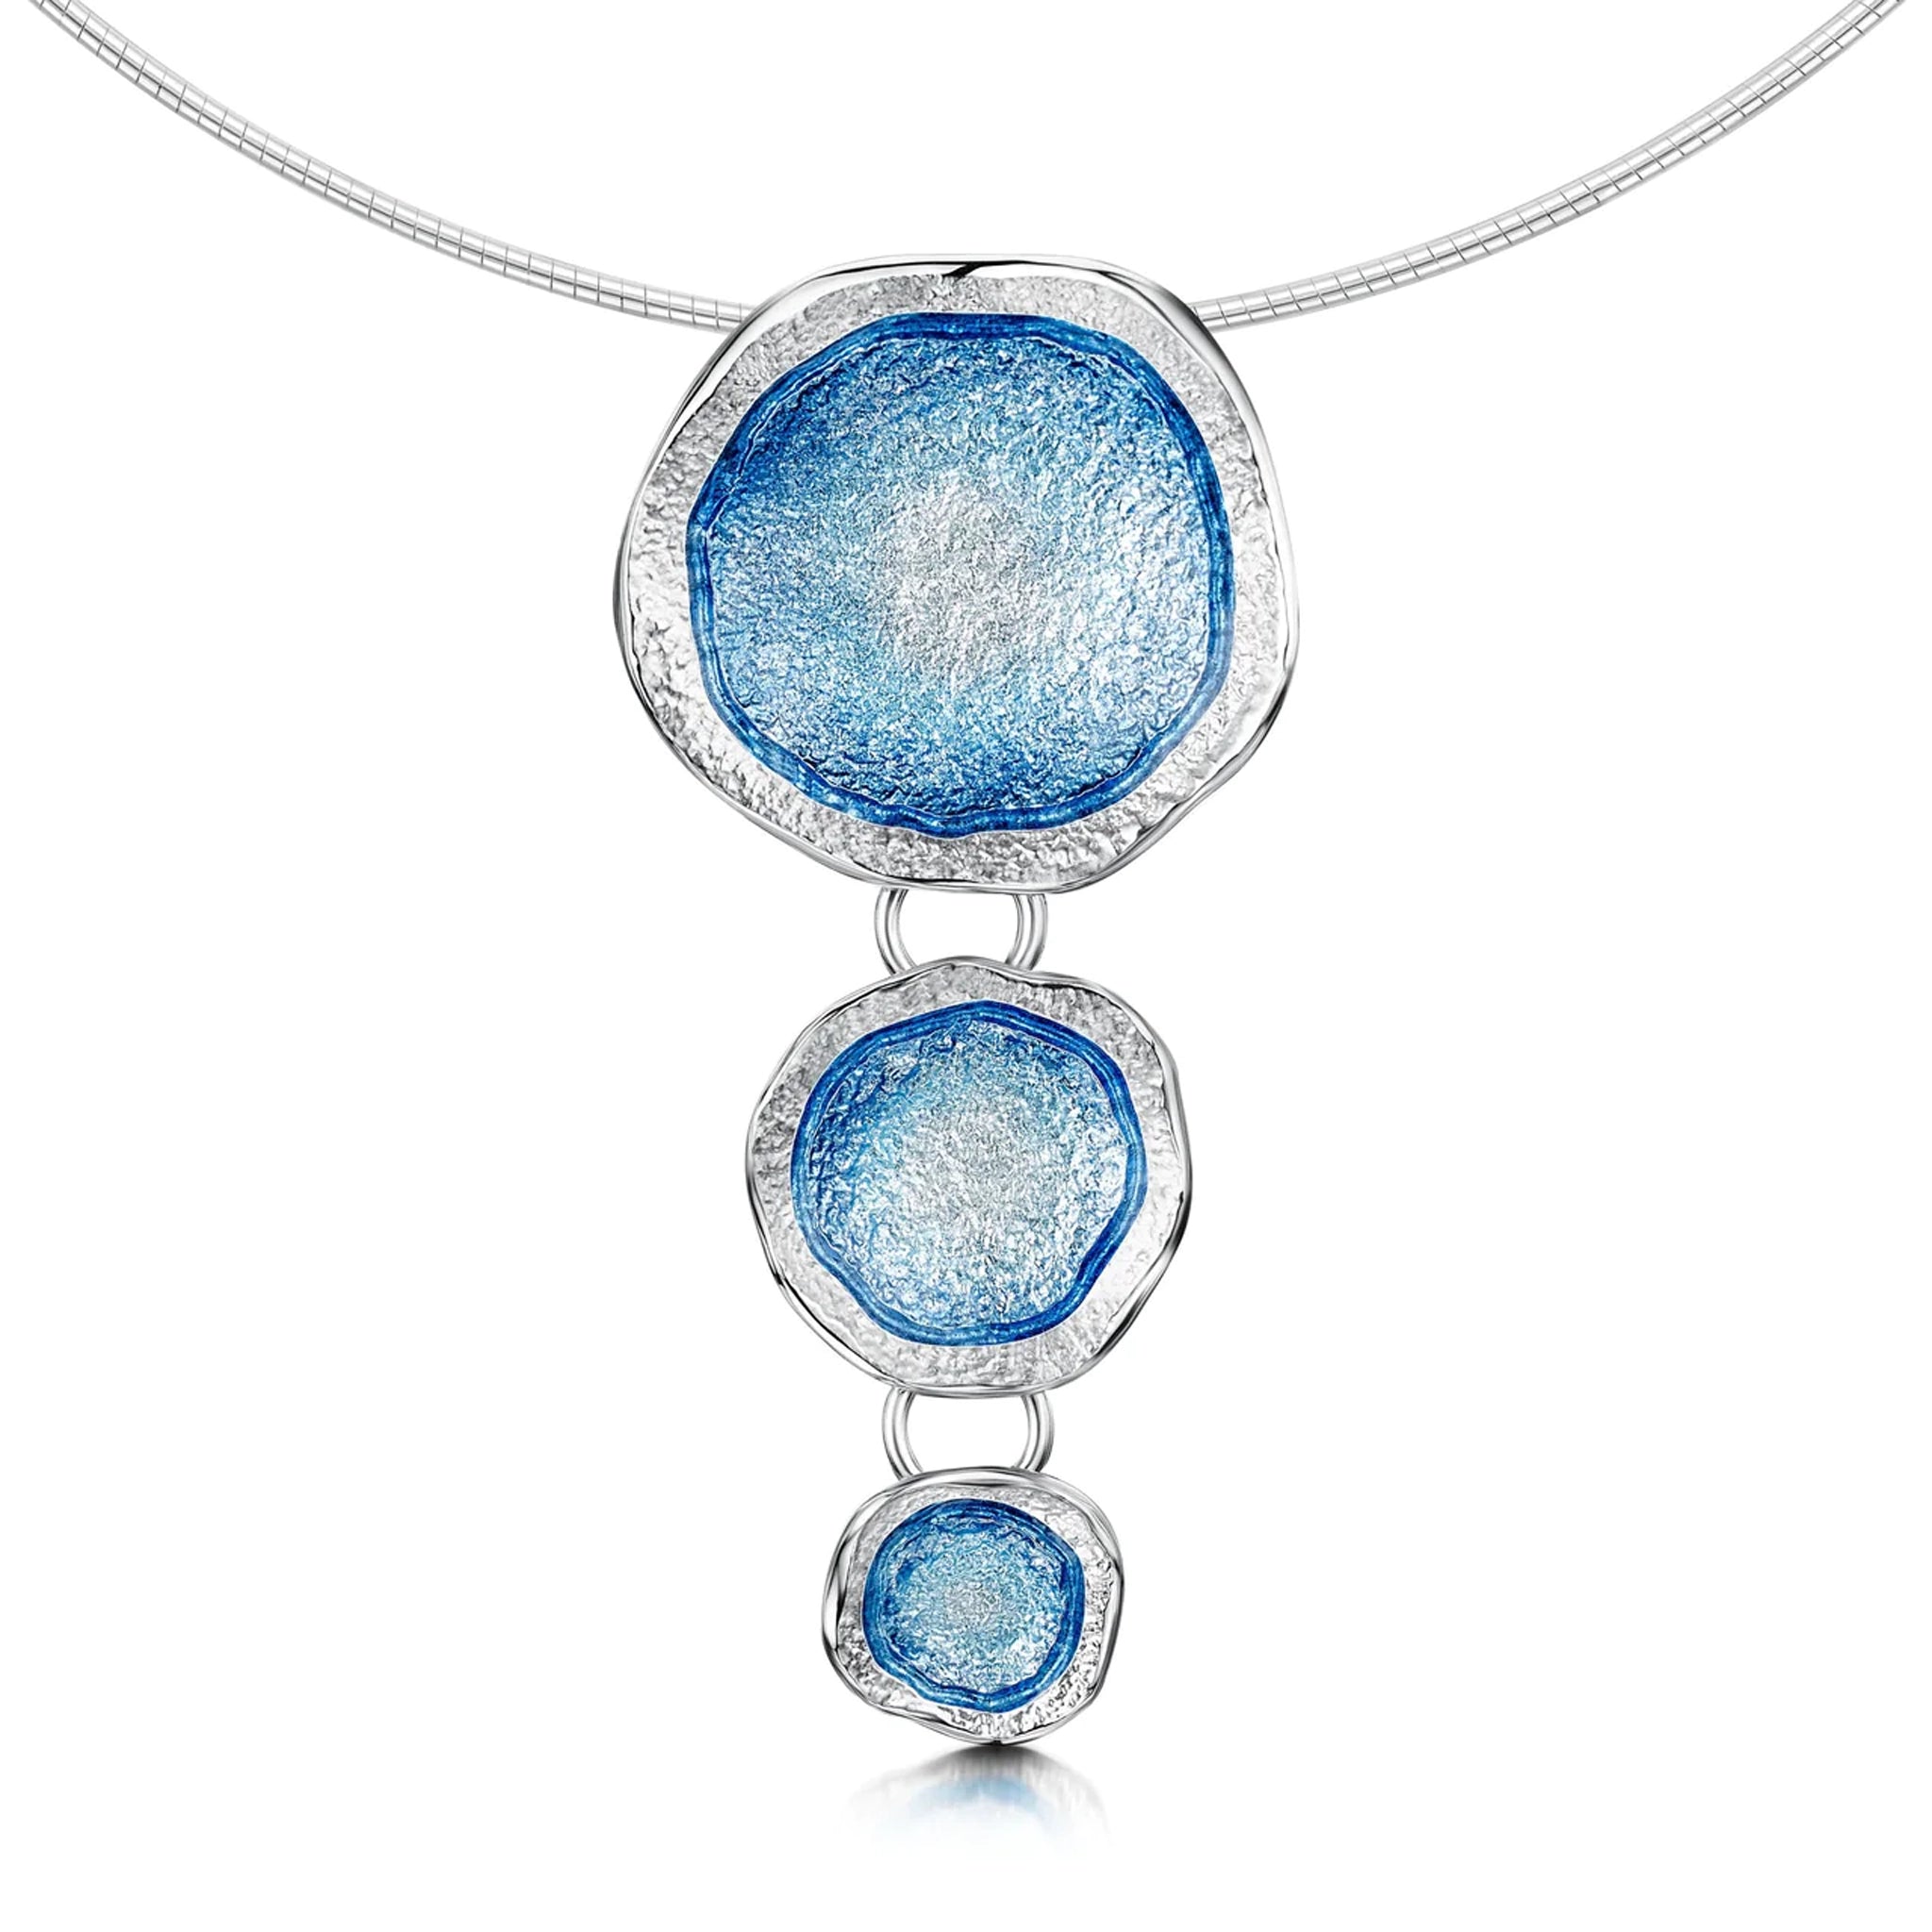 Silver triple necklet on wire, with large pendants in organic shapes with subtle texture and blue enamel centres